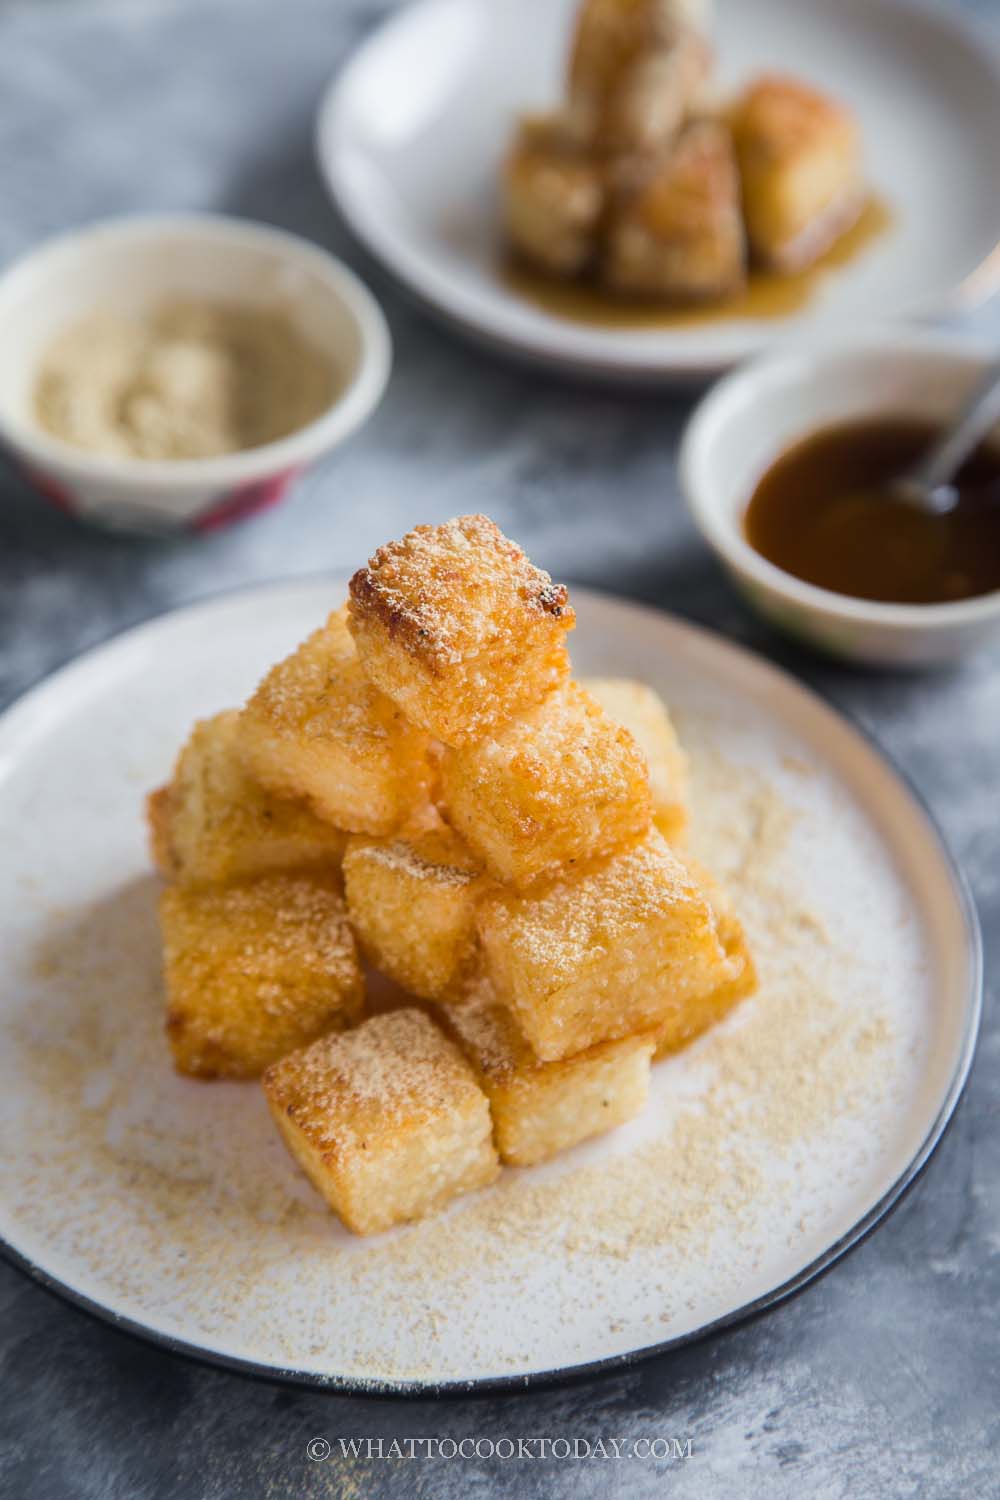 Fried Pounded Glutinous Rice Cake with Brown Sugar Syrup (Hong Tang Ci Ba)